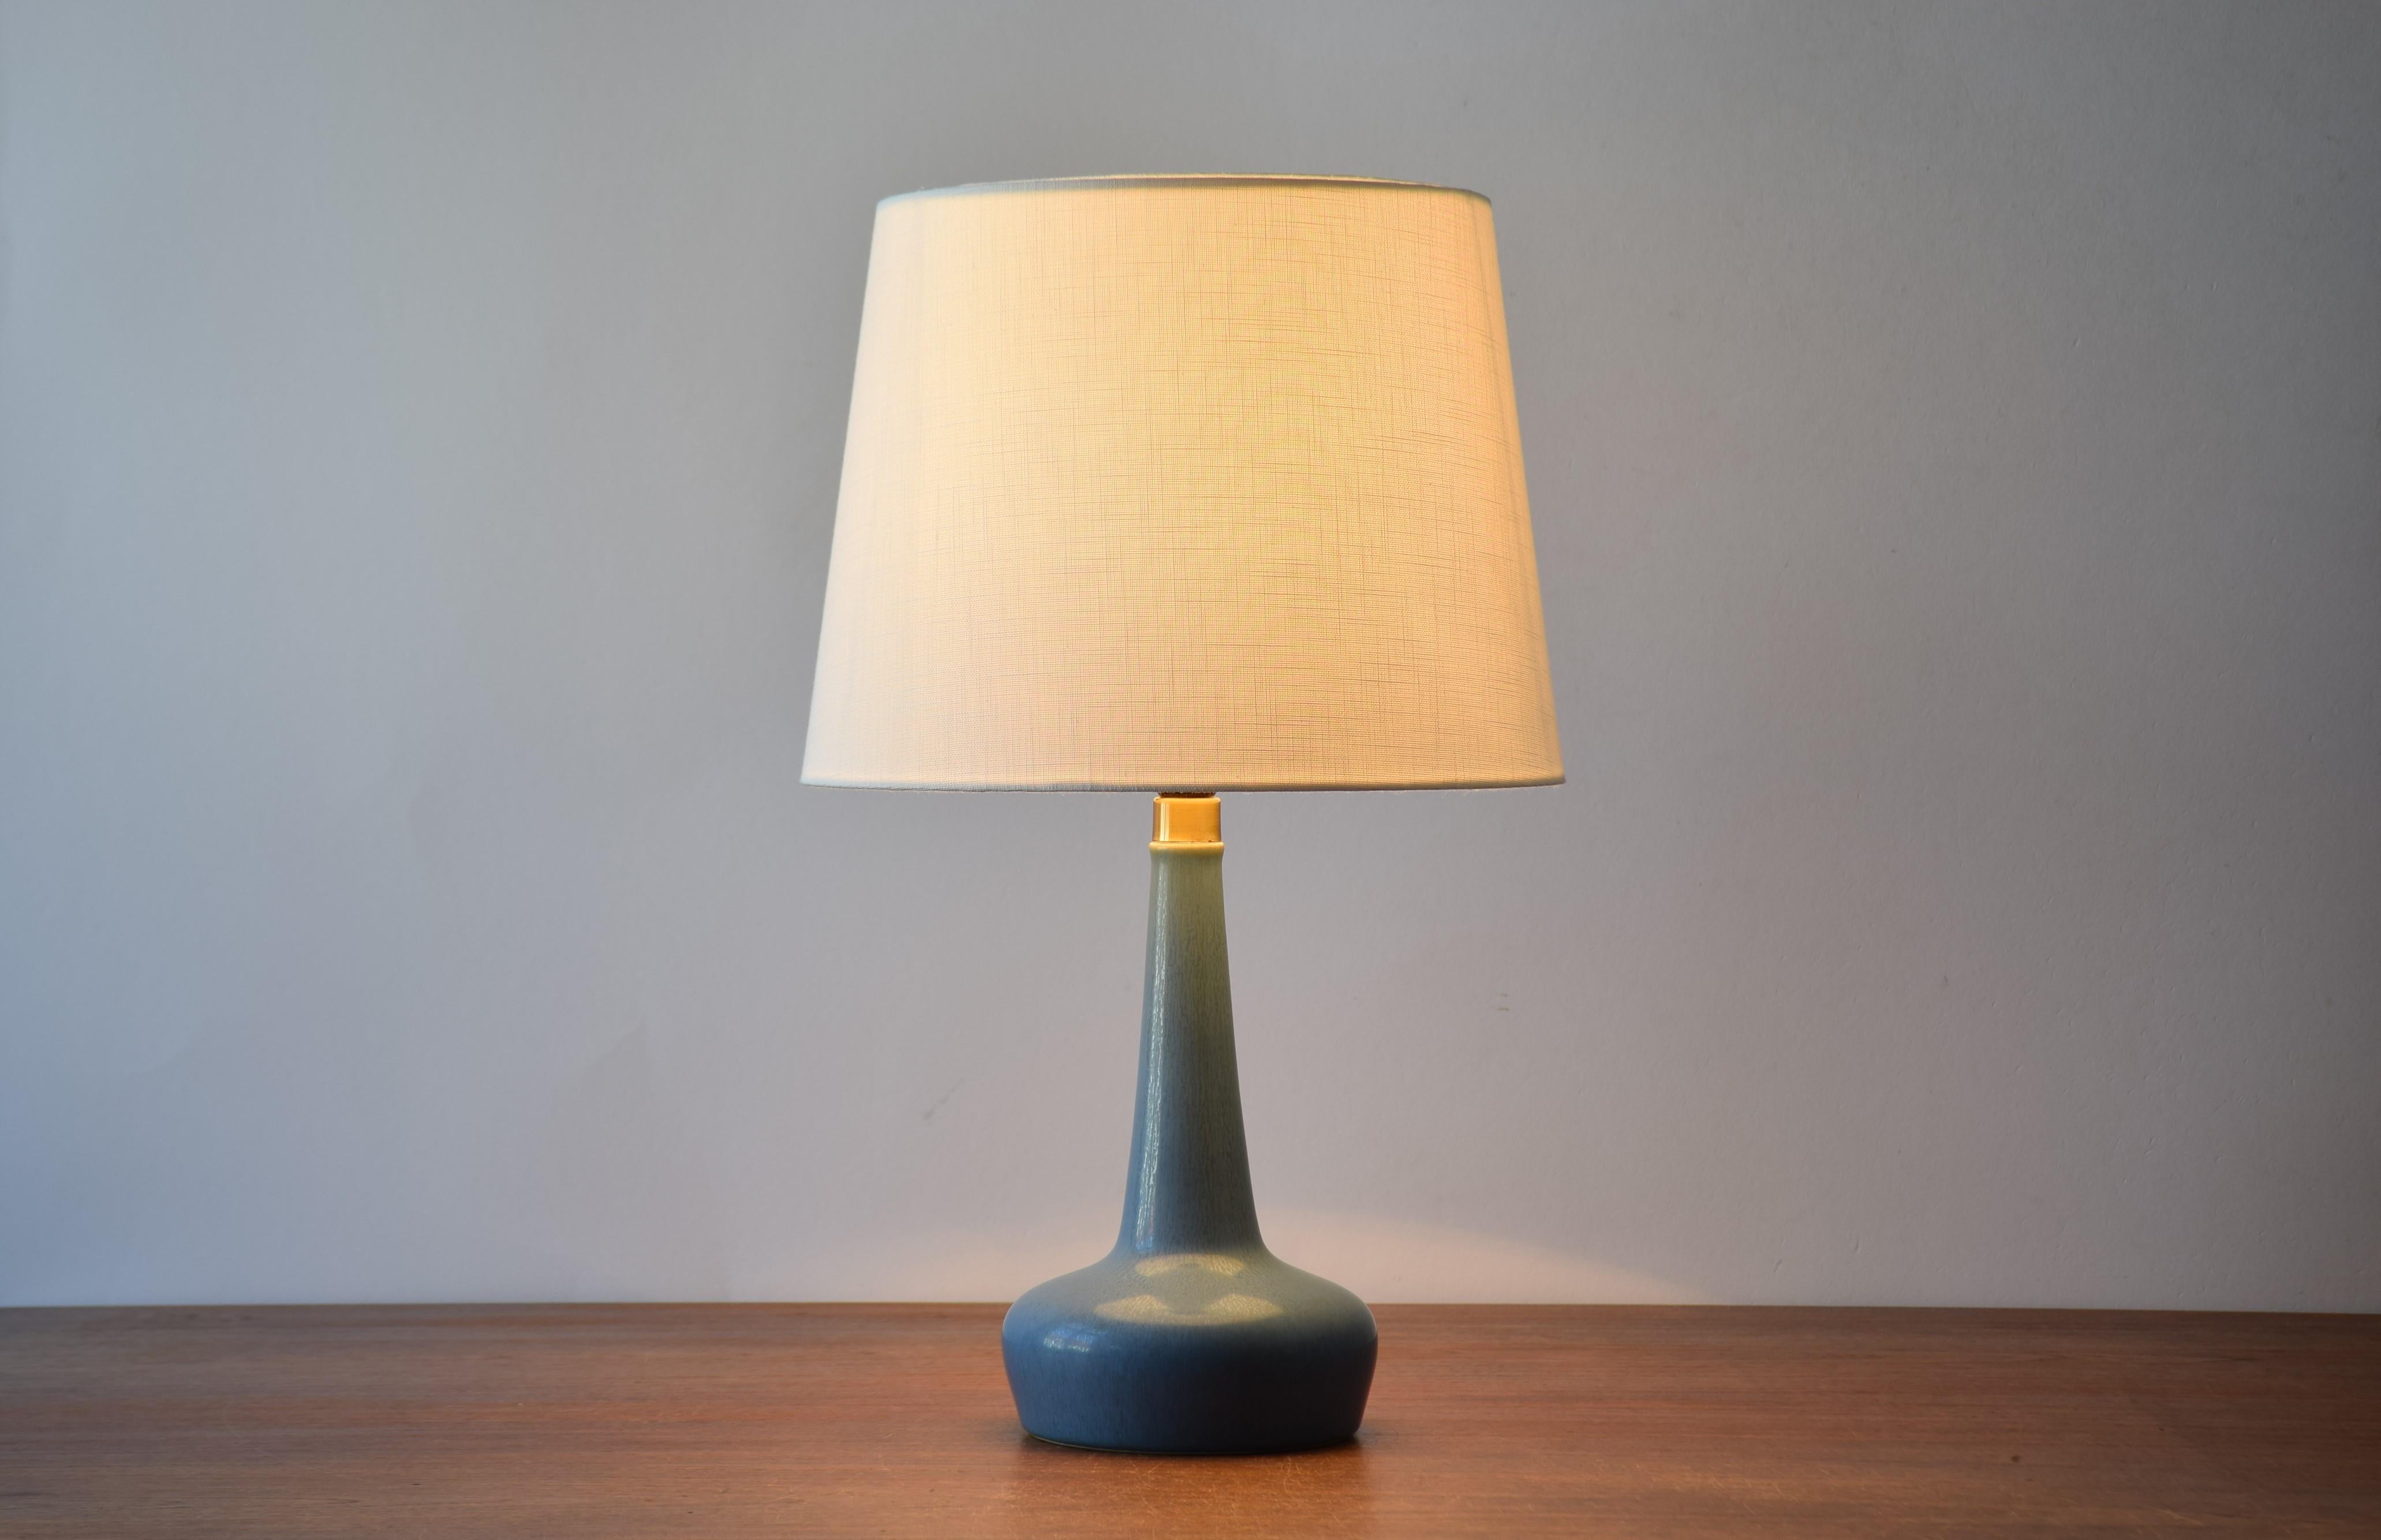 Palshus / Le Klint table lamp with blue haresfur glaze.
This lamp was designed by Esben Klint and made at the Danish Studio Pottery Palshus for the Danish lampvmanufacturer Le Klint. Made circa 1960s.

Marked: Palshus Stentöj Le Klint Made in